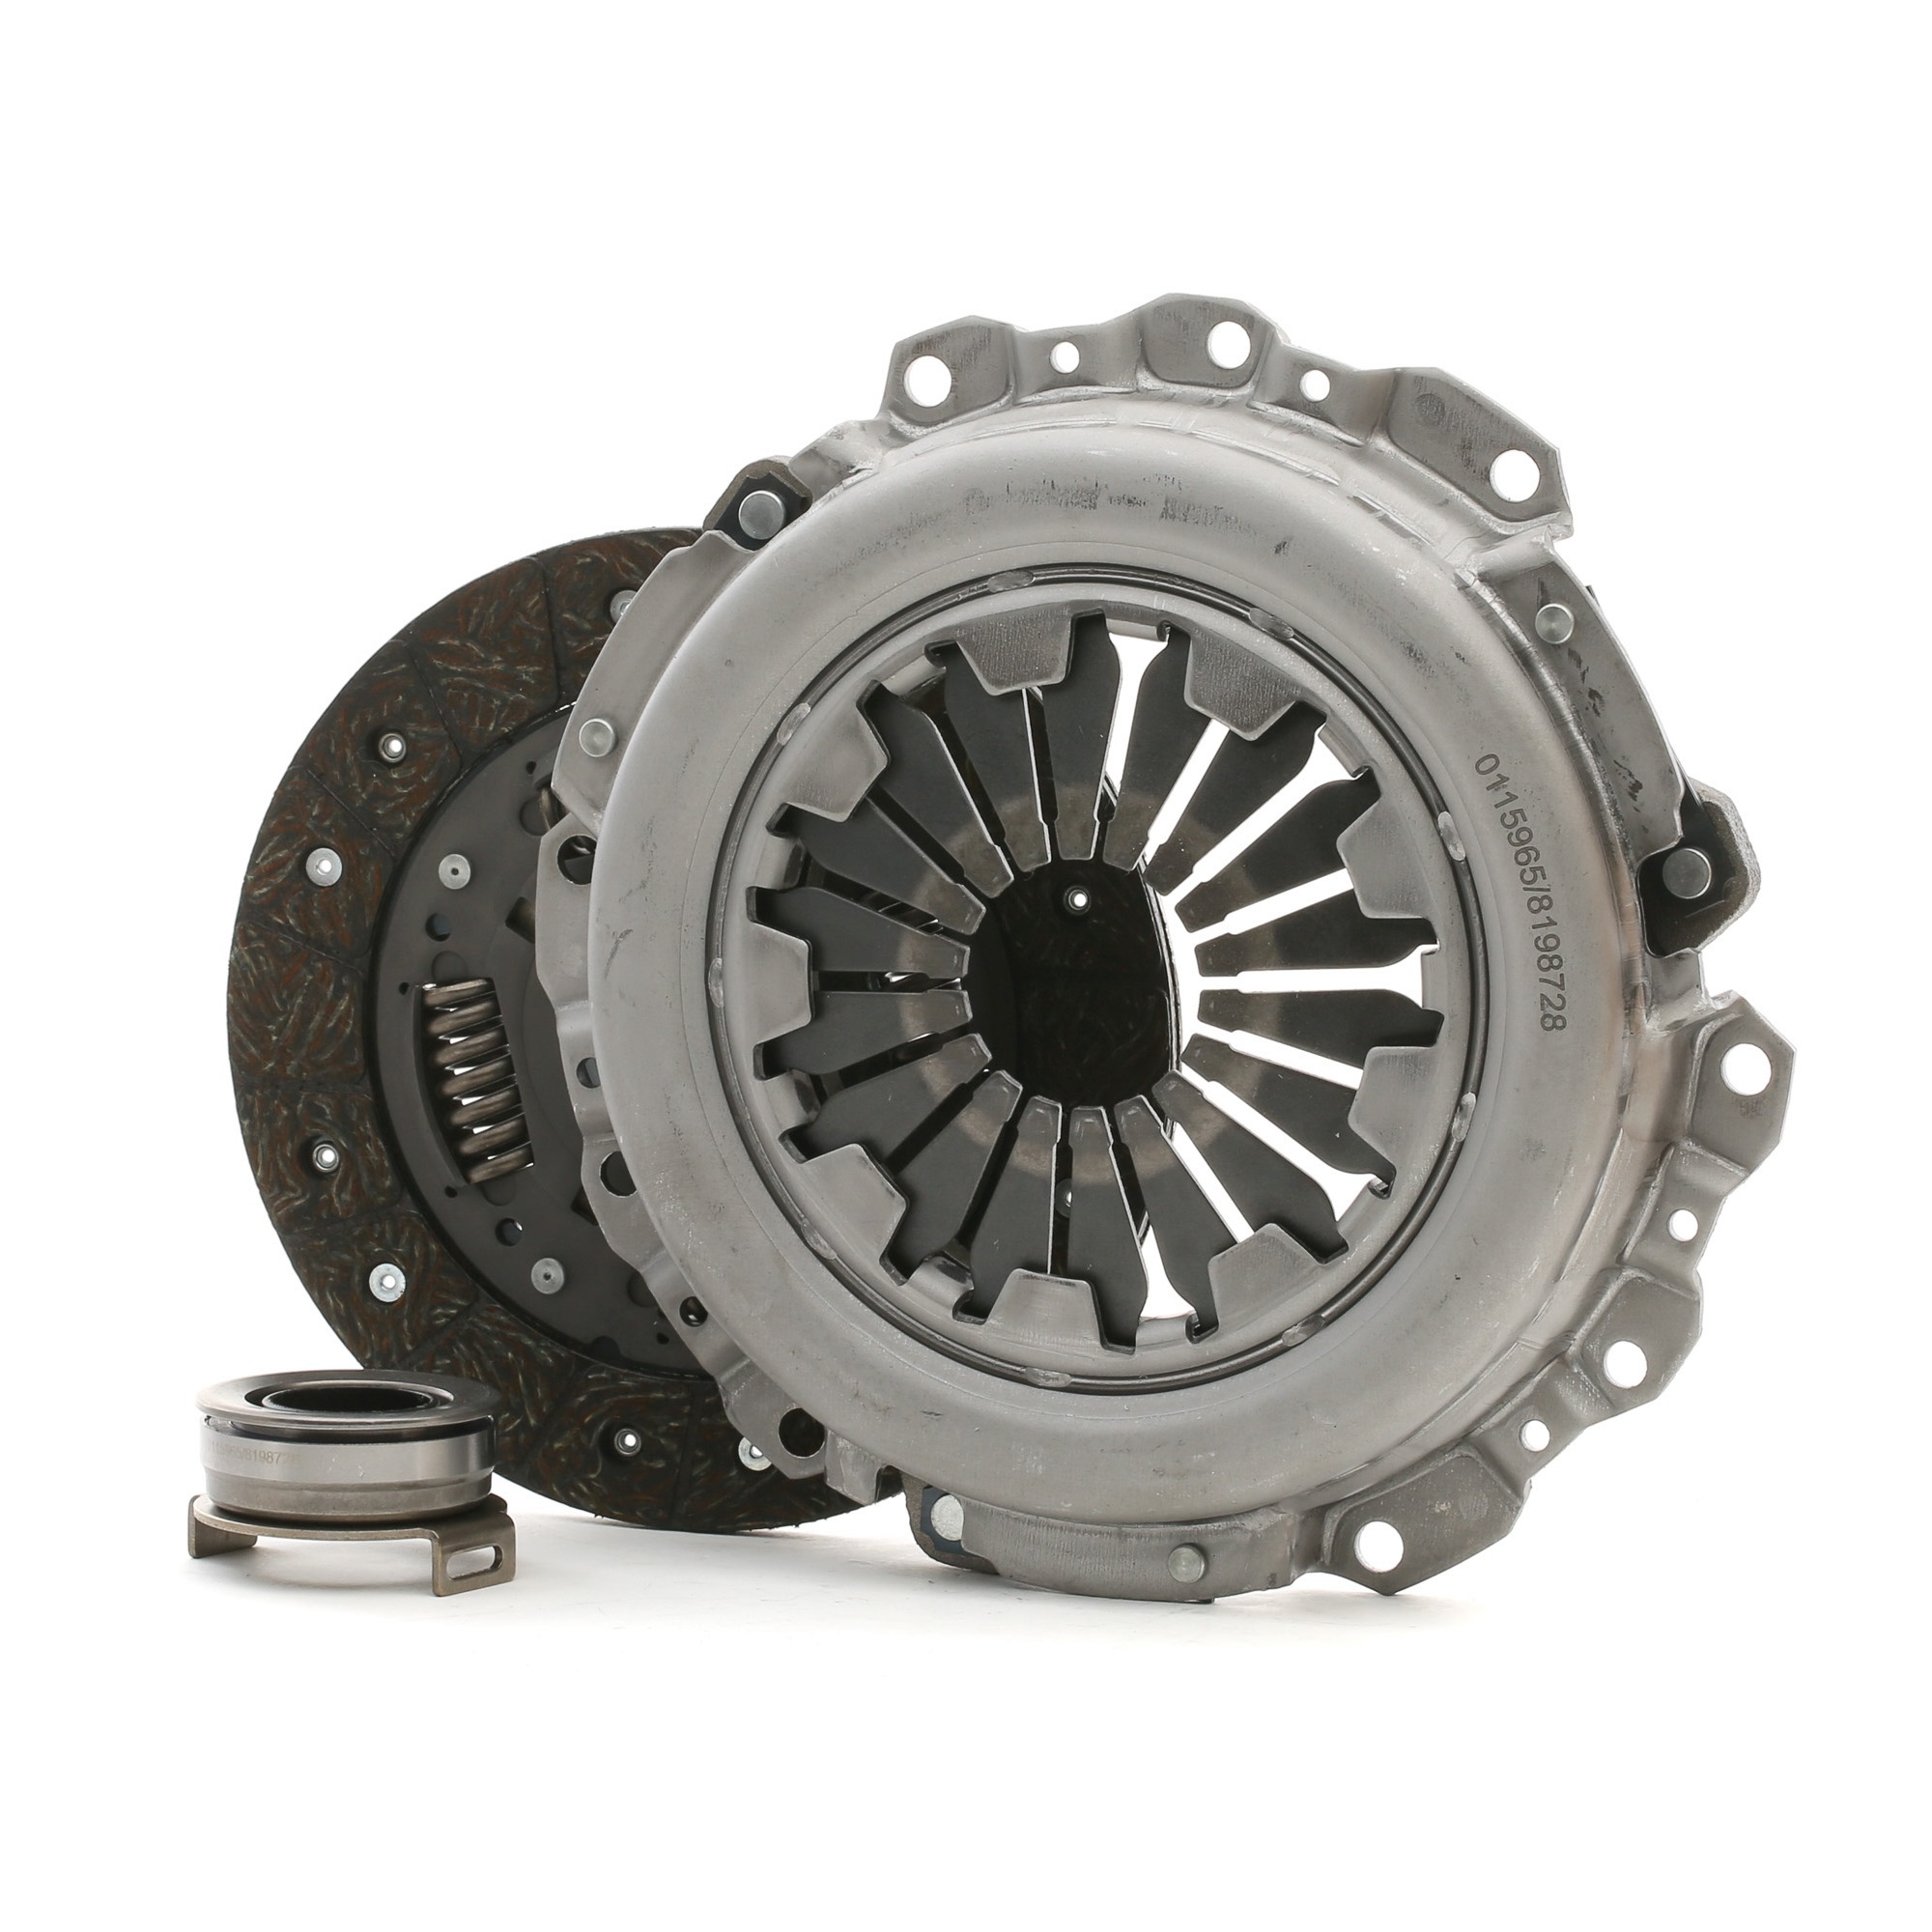 STARK SKCK-0100172 Clutch kit three-piece, with clutch release bearing, with clutch disc, 190mm